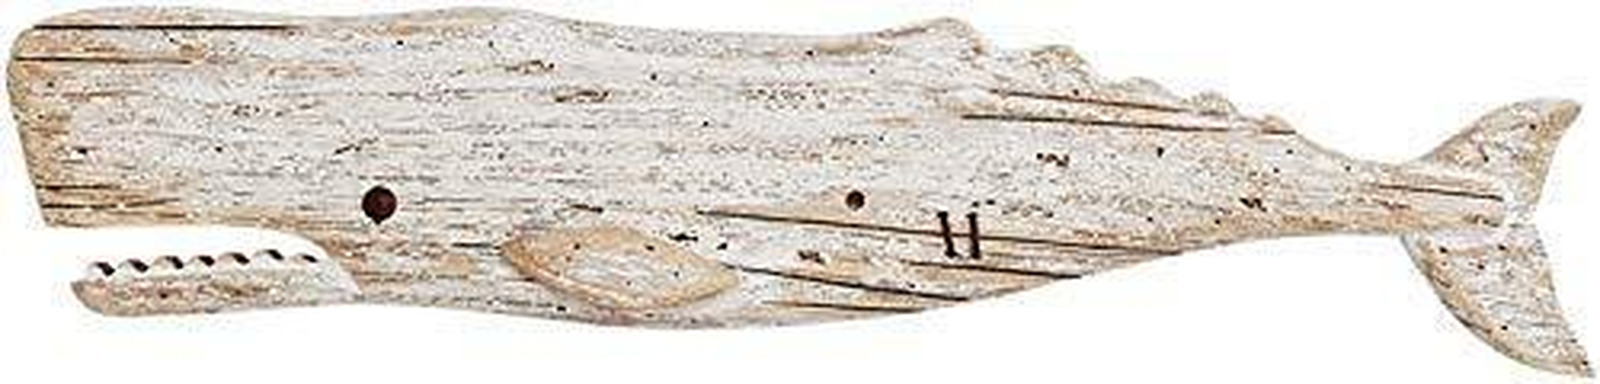 Hanging Wooden Whale Wall Art Ornament Rustic Wooden Decorative Whale Figurine C